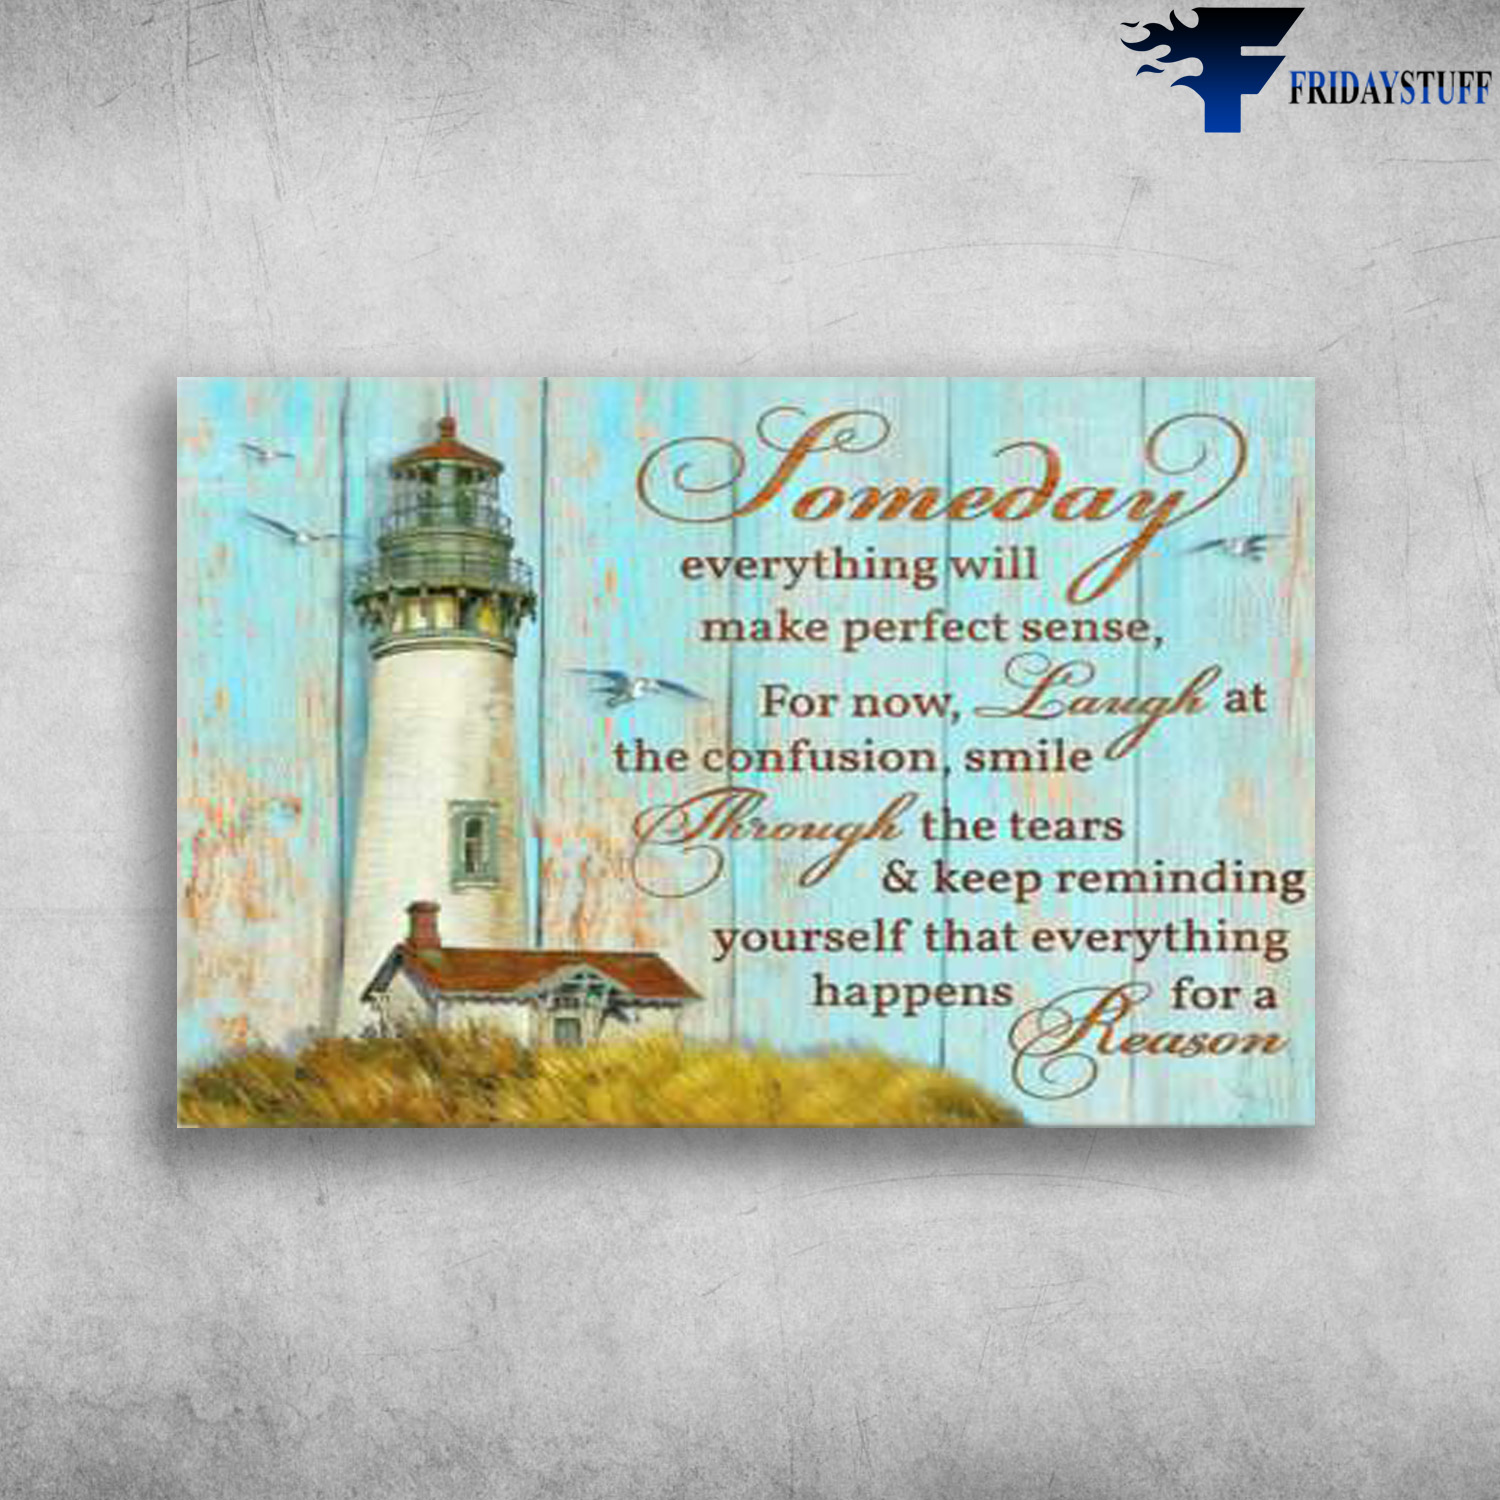 Lighthouse Albatross - Someday Everything Will Make Perfect Sense, For Now, Laugh At, The Confusion, Smile Through The Tears, And Keep Reminding Yourself, That Evething Happens For A Reason